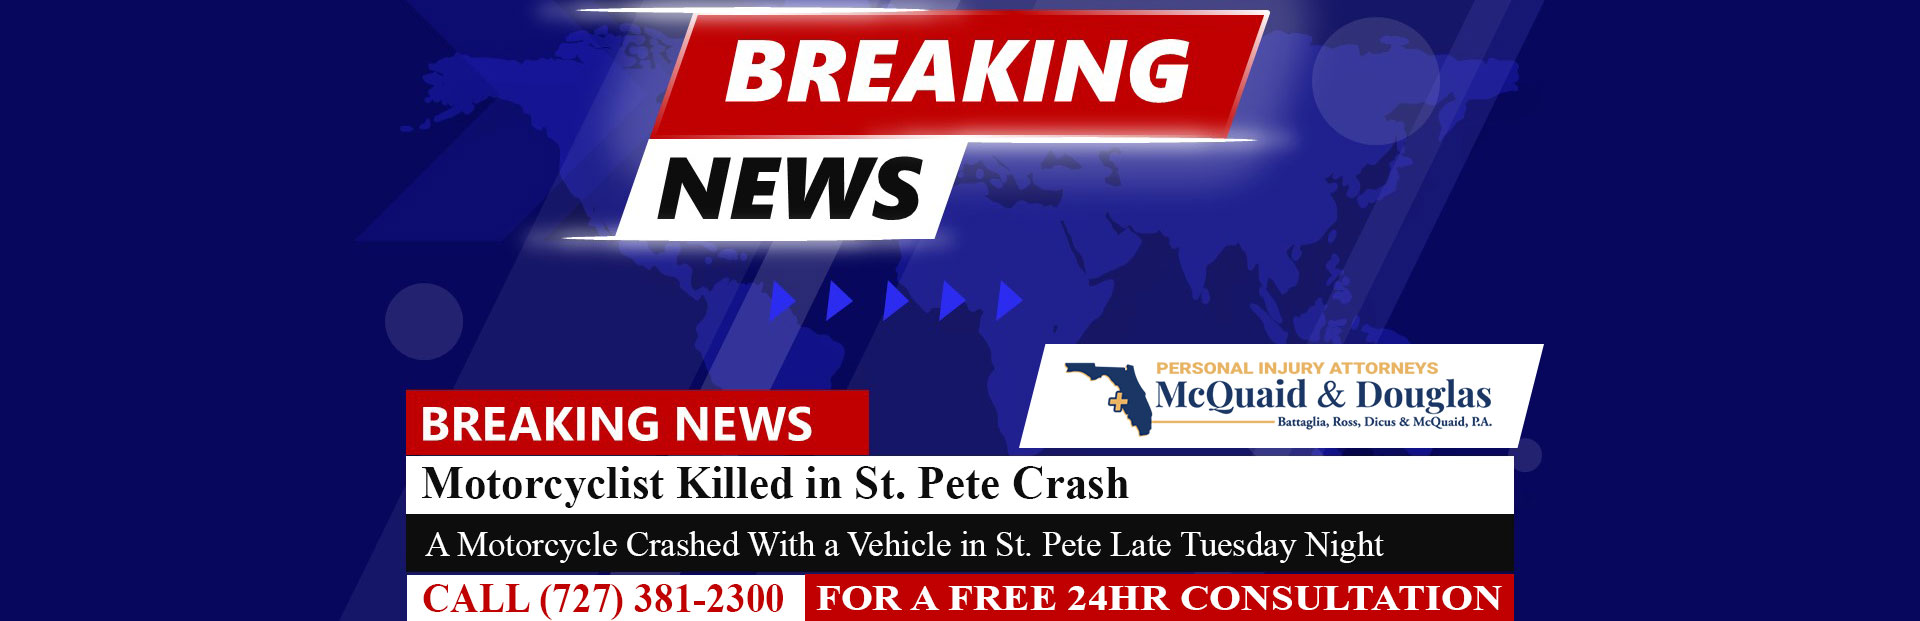 [06-05-24] Motorcyclist Killed in St. Pete Crash